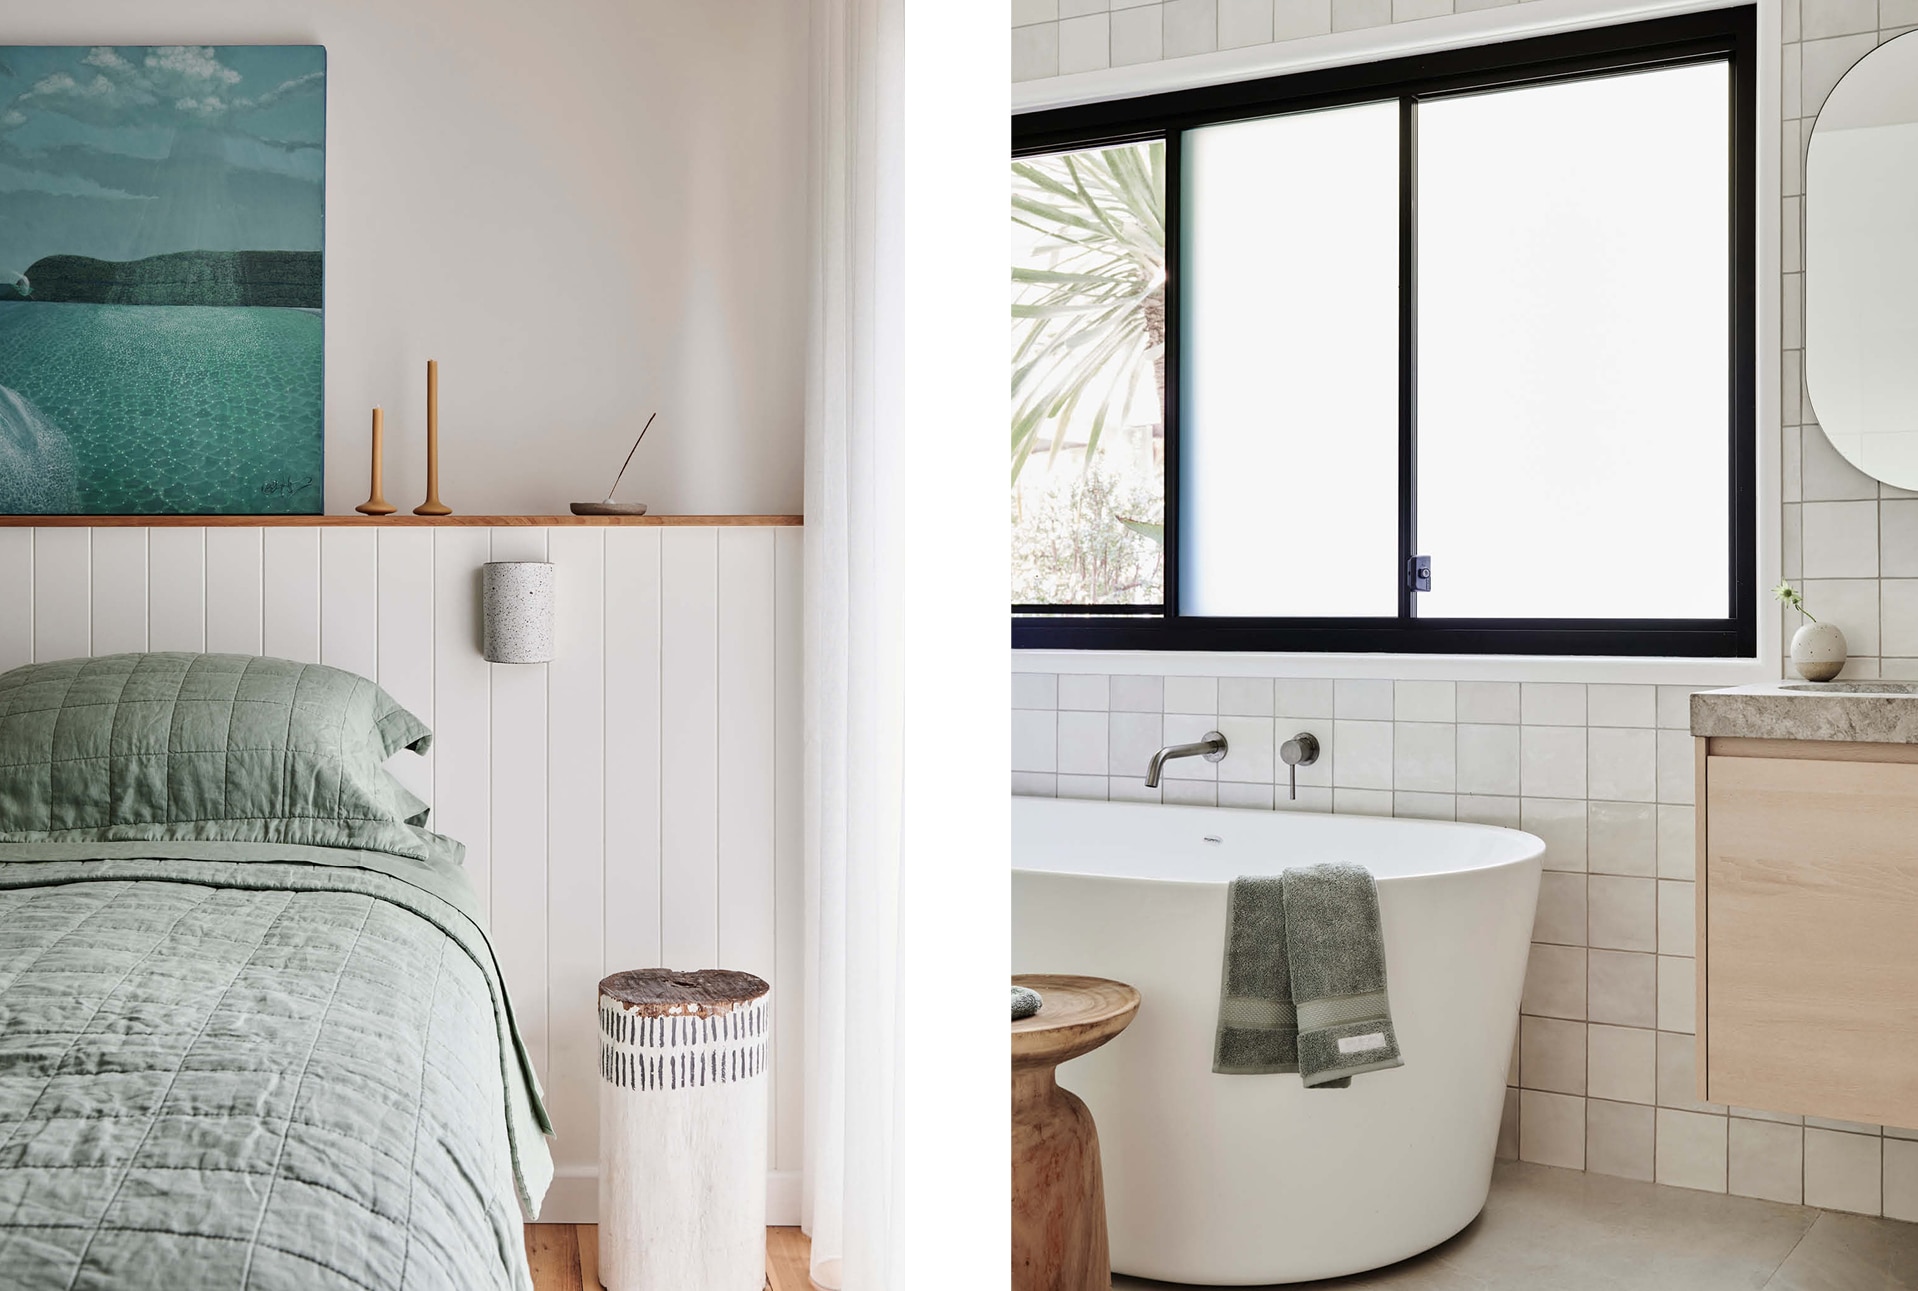 split image. left side: master bedroom, with bed dressed in abbotson linen in cactus. painting above bed, wooden stump as bedside table. right side: bathroom with white tiled walls and white bathtub. luxury egyptian hand towel in dew hangs over tub.